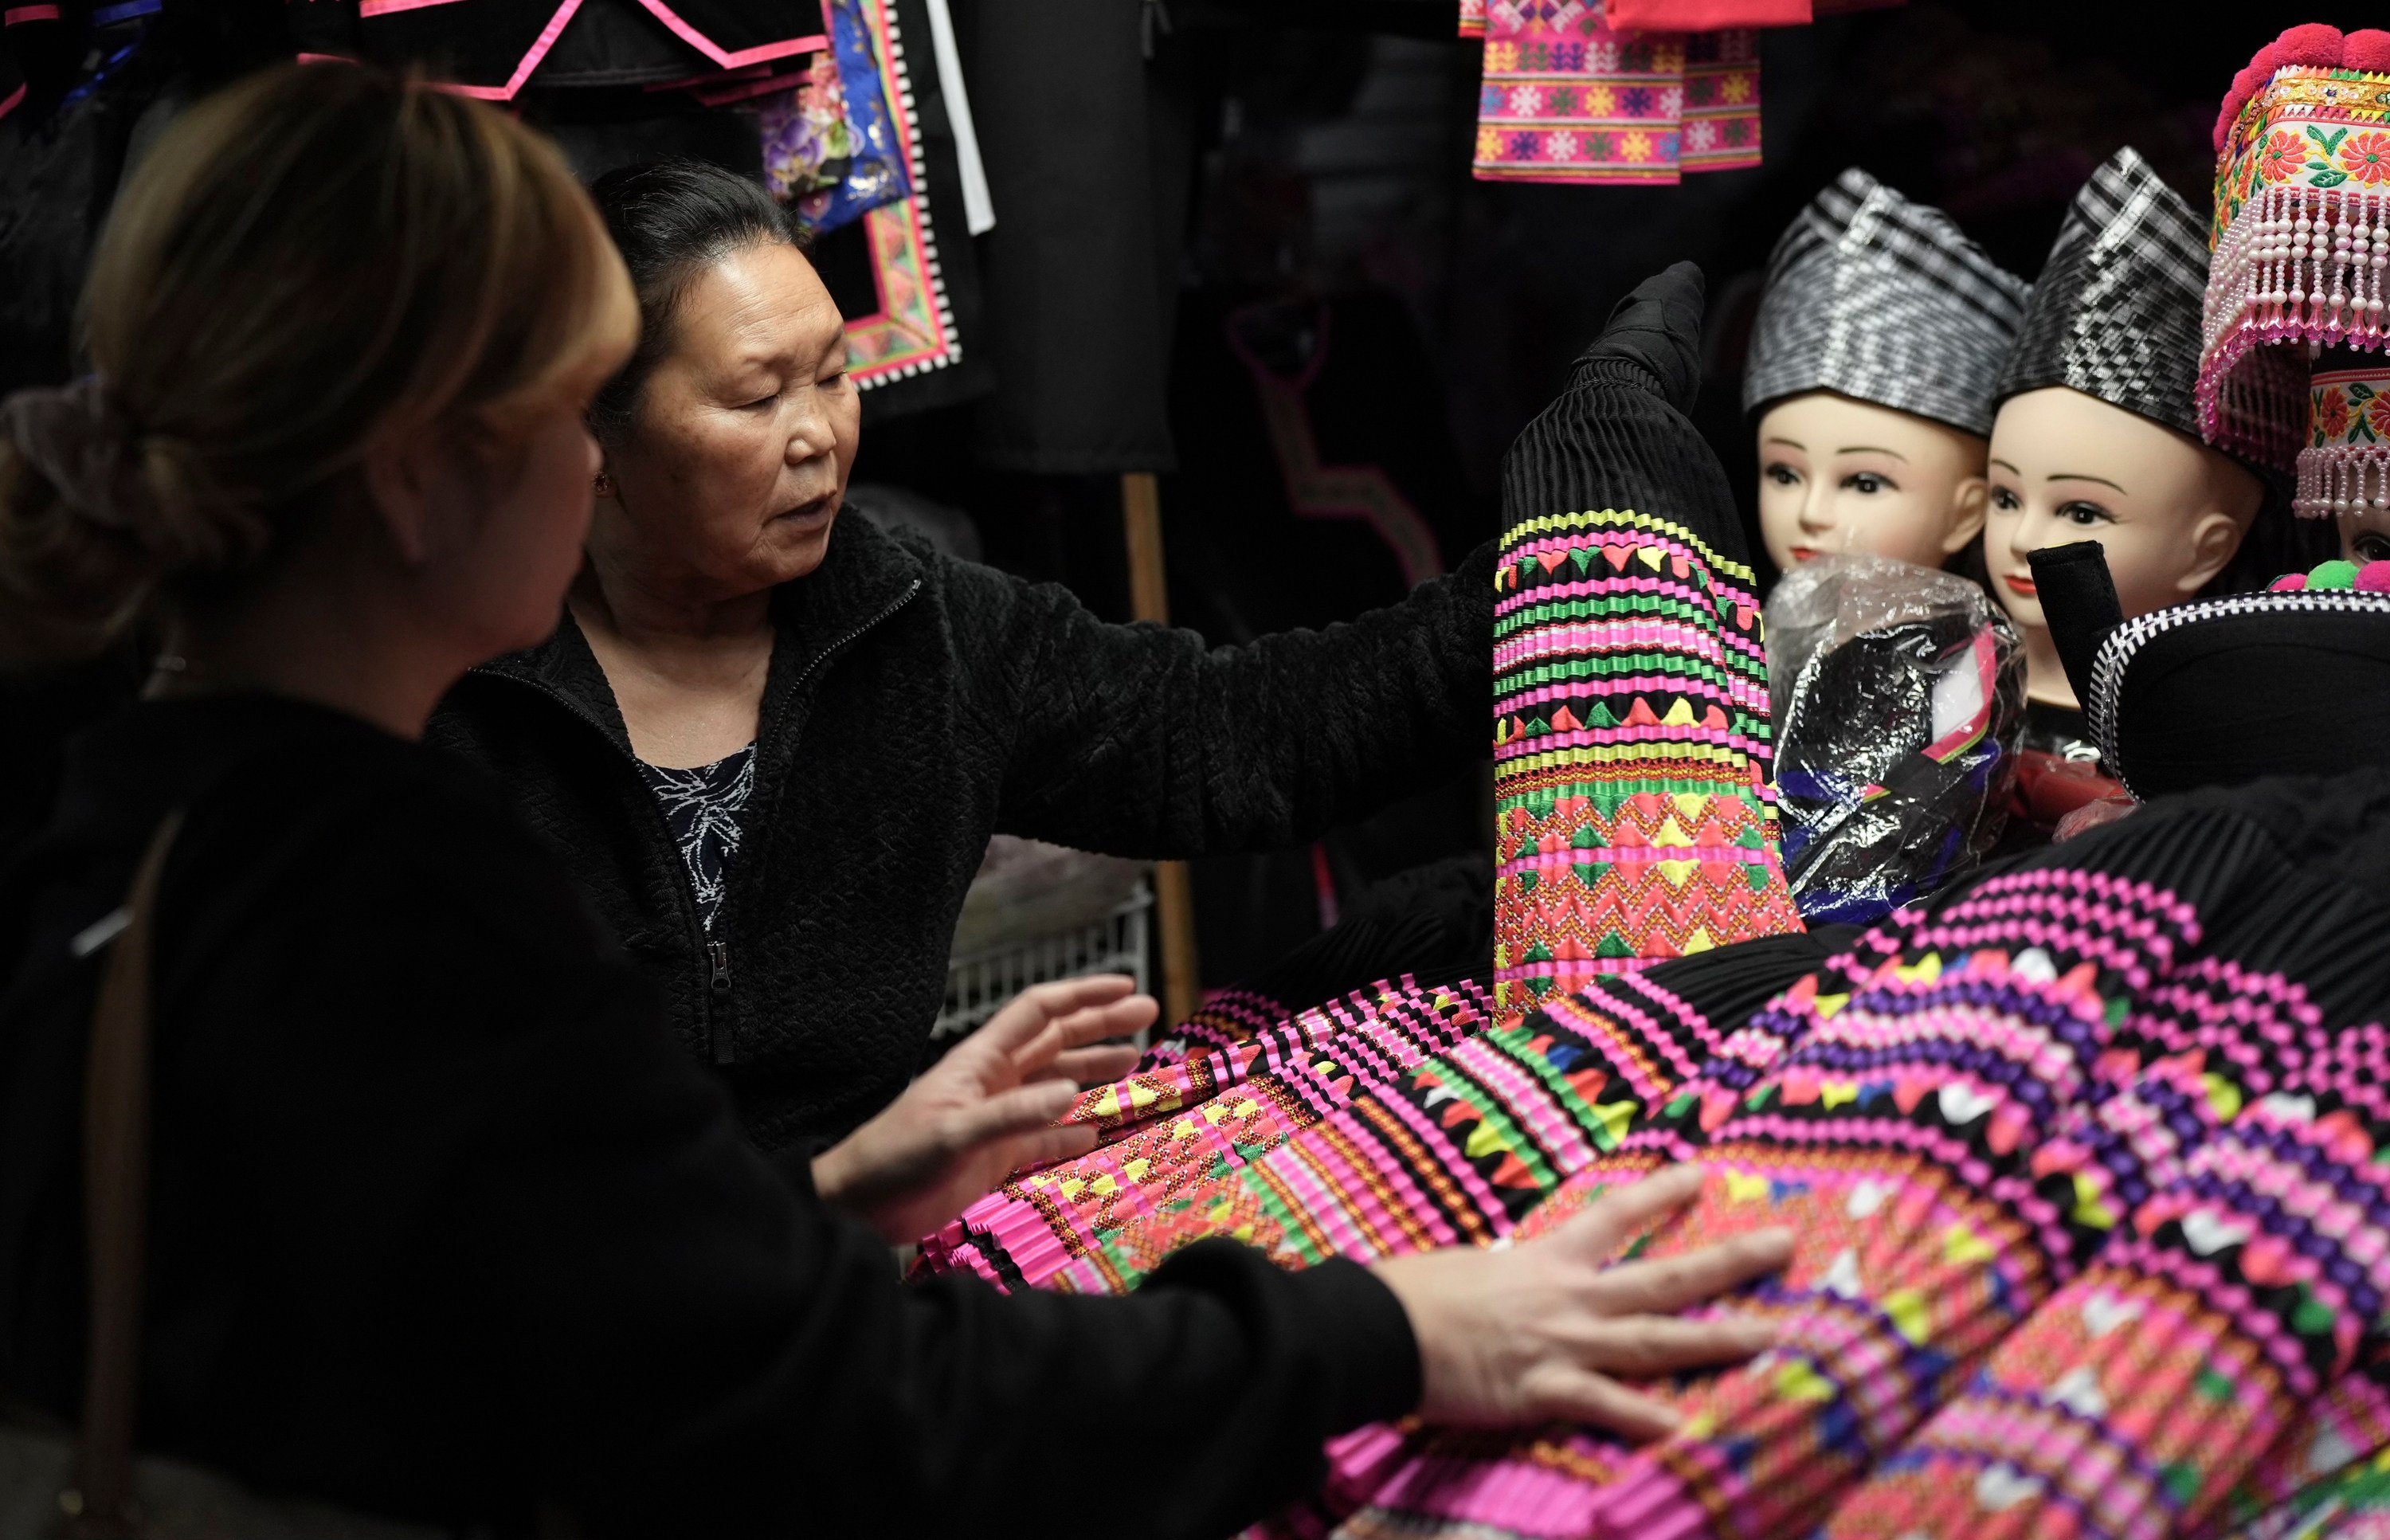 Shoppers look for pleated skirts and other clothing for Hmong New Year for sale at the stall of Elisa Her, left, in the Hmong Village covered market in St Paul, Minnesota. The New Year, celebrated at various dates in autumn by Hmong Americans, is the most important traditional spiritual celebration for these Southeast Asian refugees who settled in the United States after fighting on its side in the Vietnam War. Photo: AP